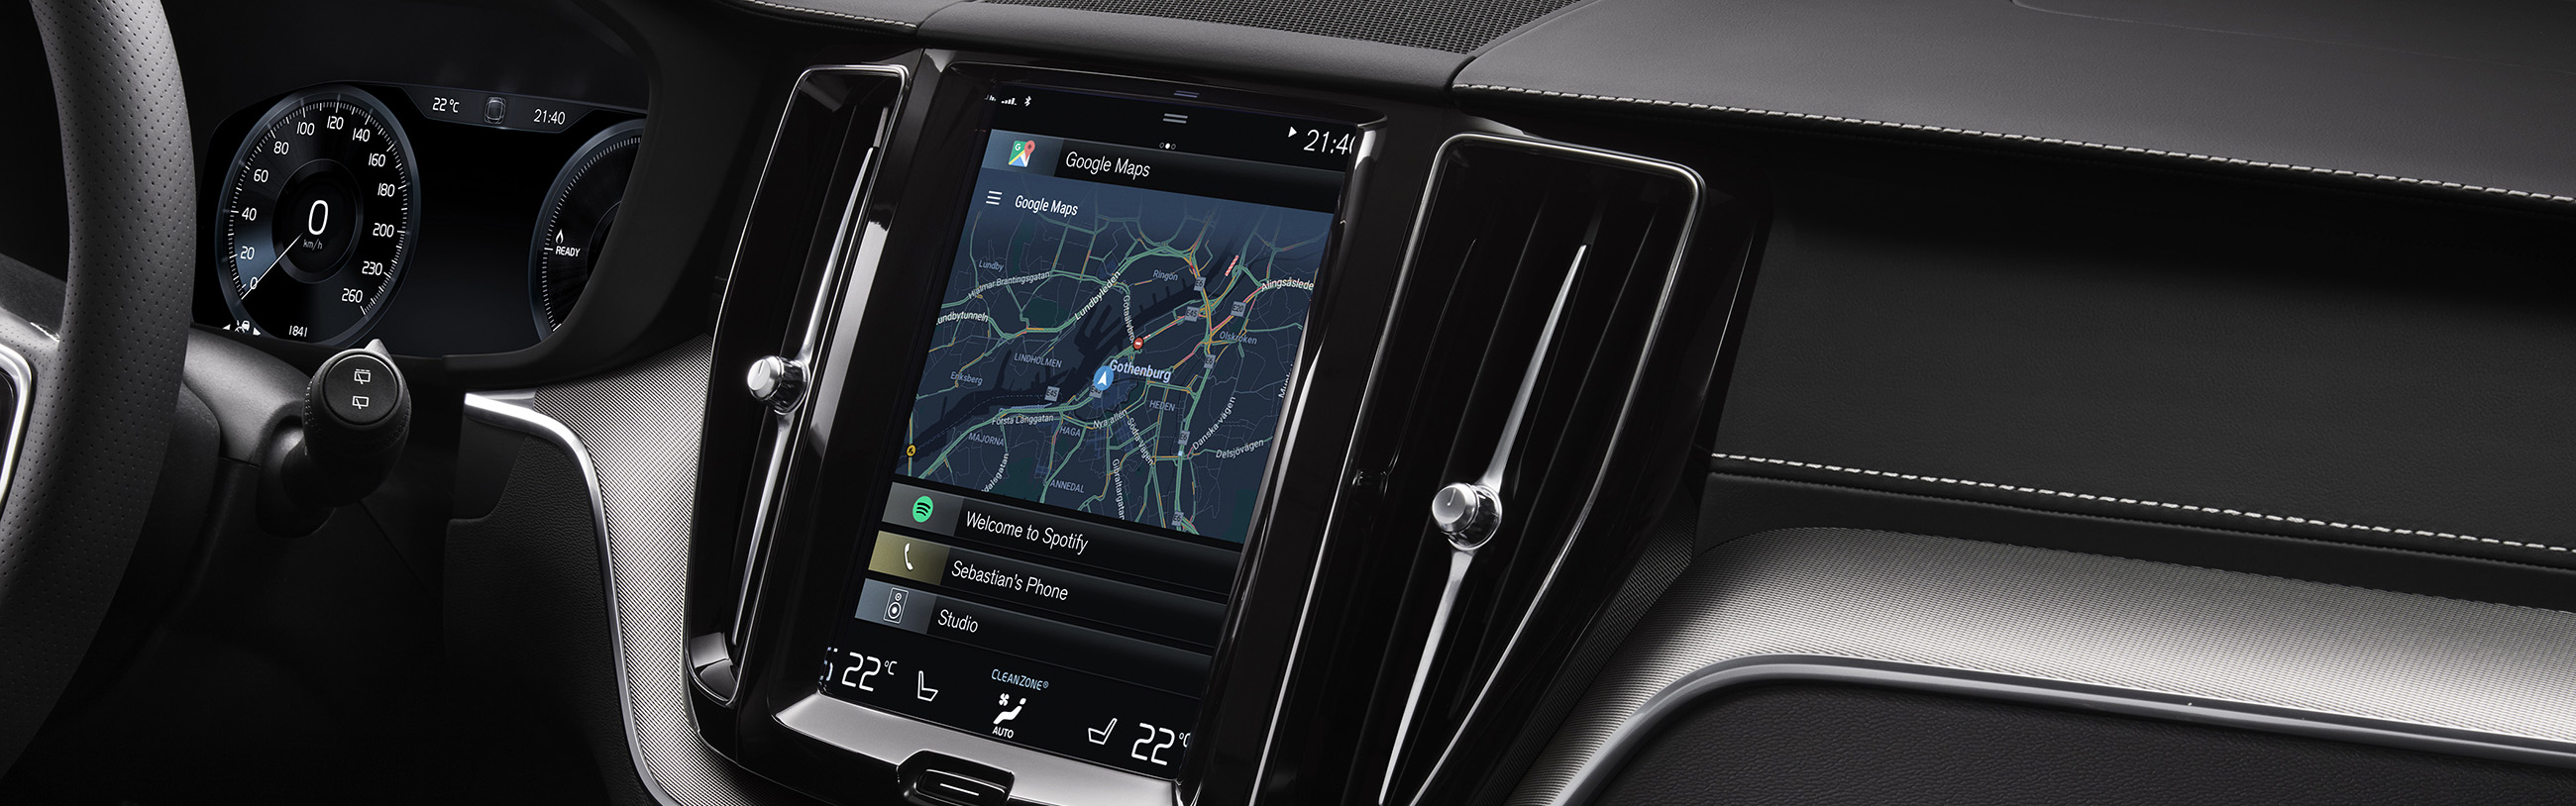 Volvo Cars Android